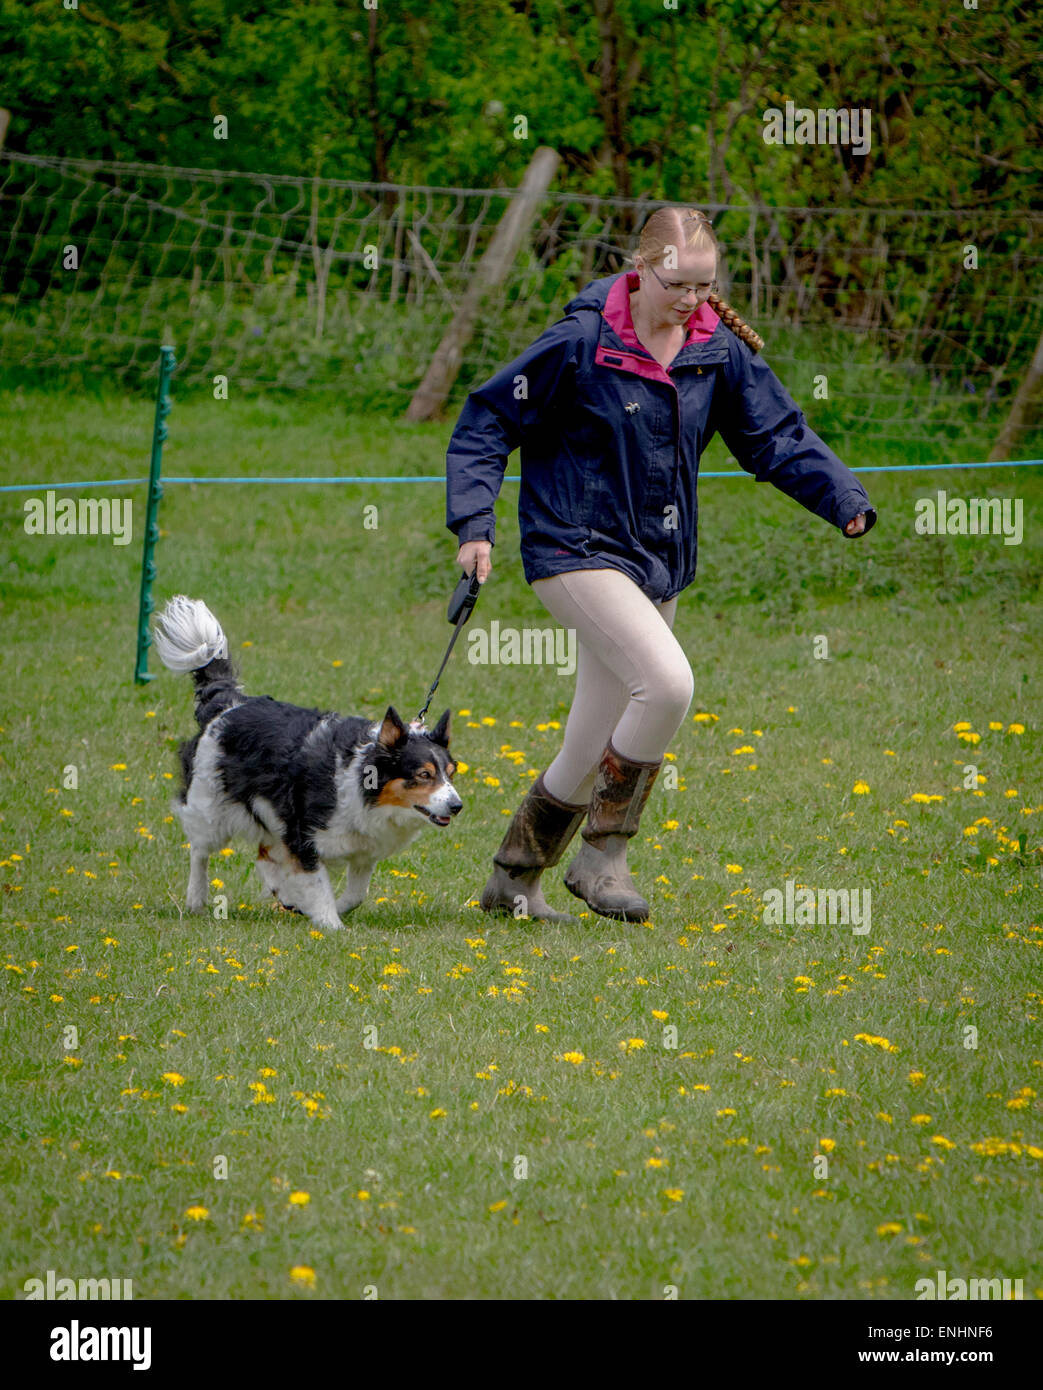 Dogs and their owners take part in an Alvechurch Riding Club Show in the hope that their canine skills can help them win prizes Stock Photo